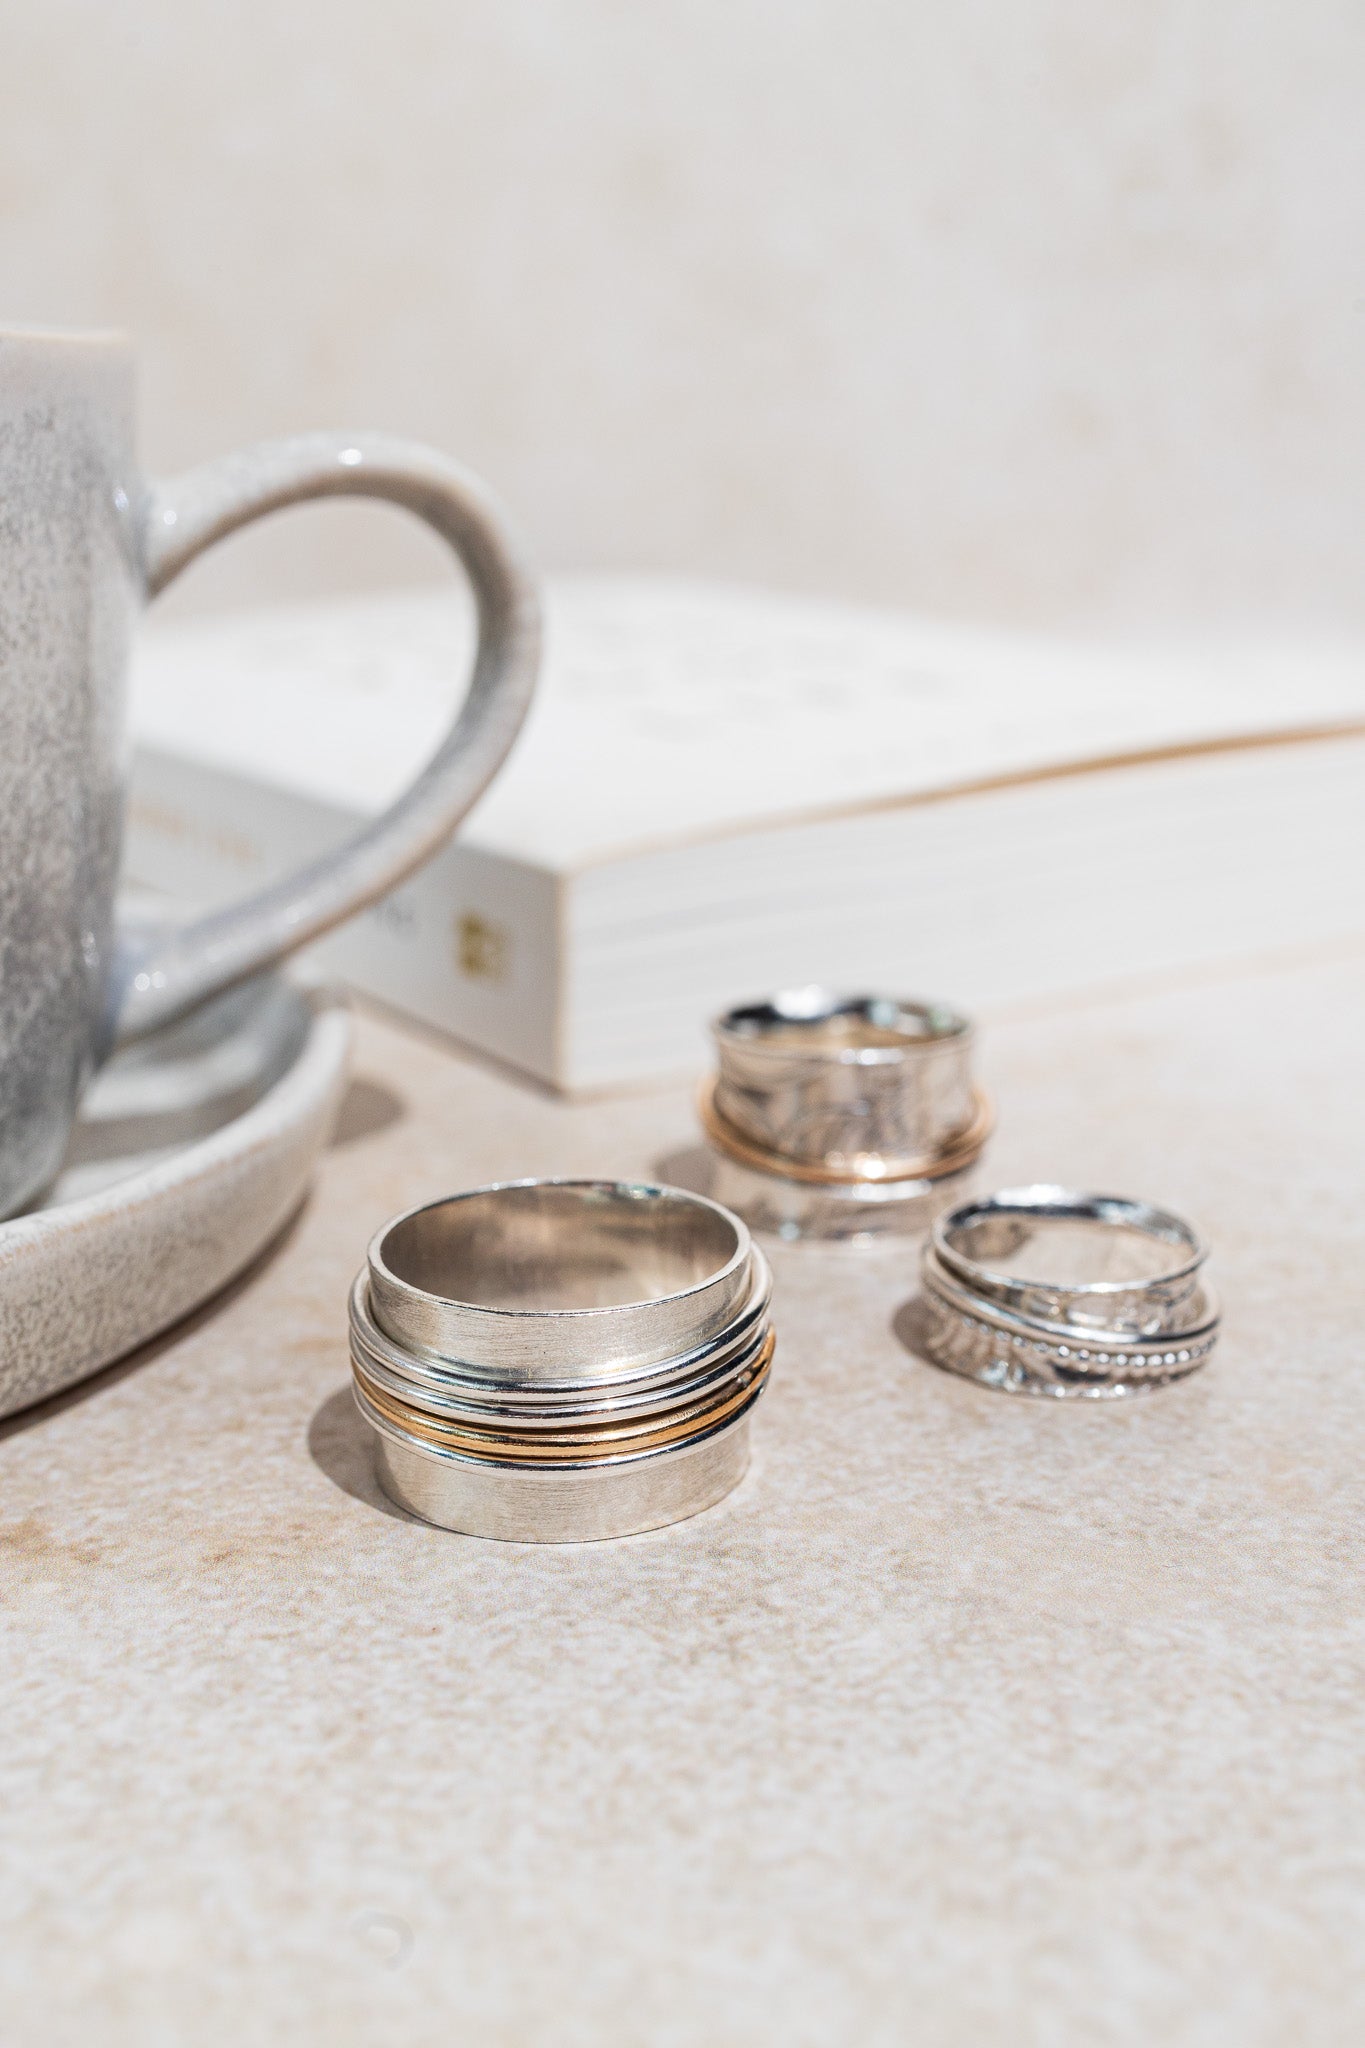 sterling silver spinner textured finished with downward bark like markings finished 3 gold filled outer rings shown here with a cup and a book